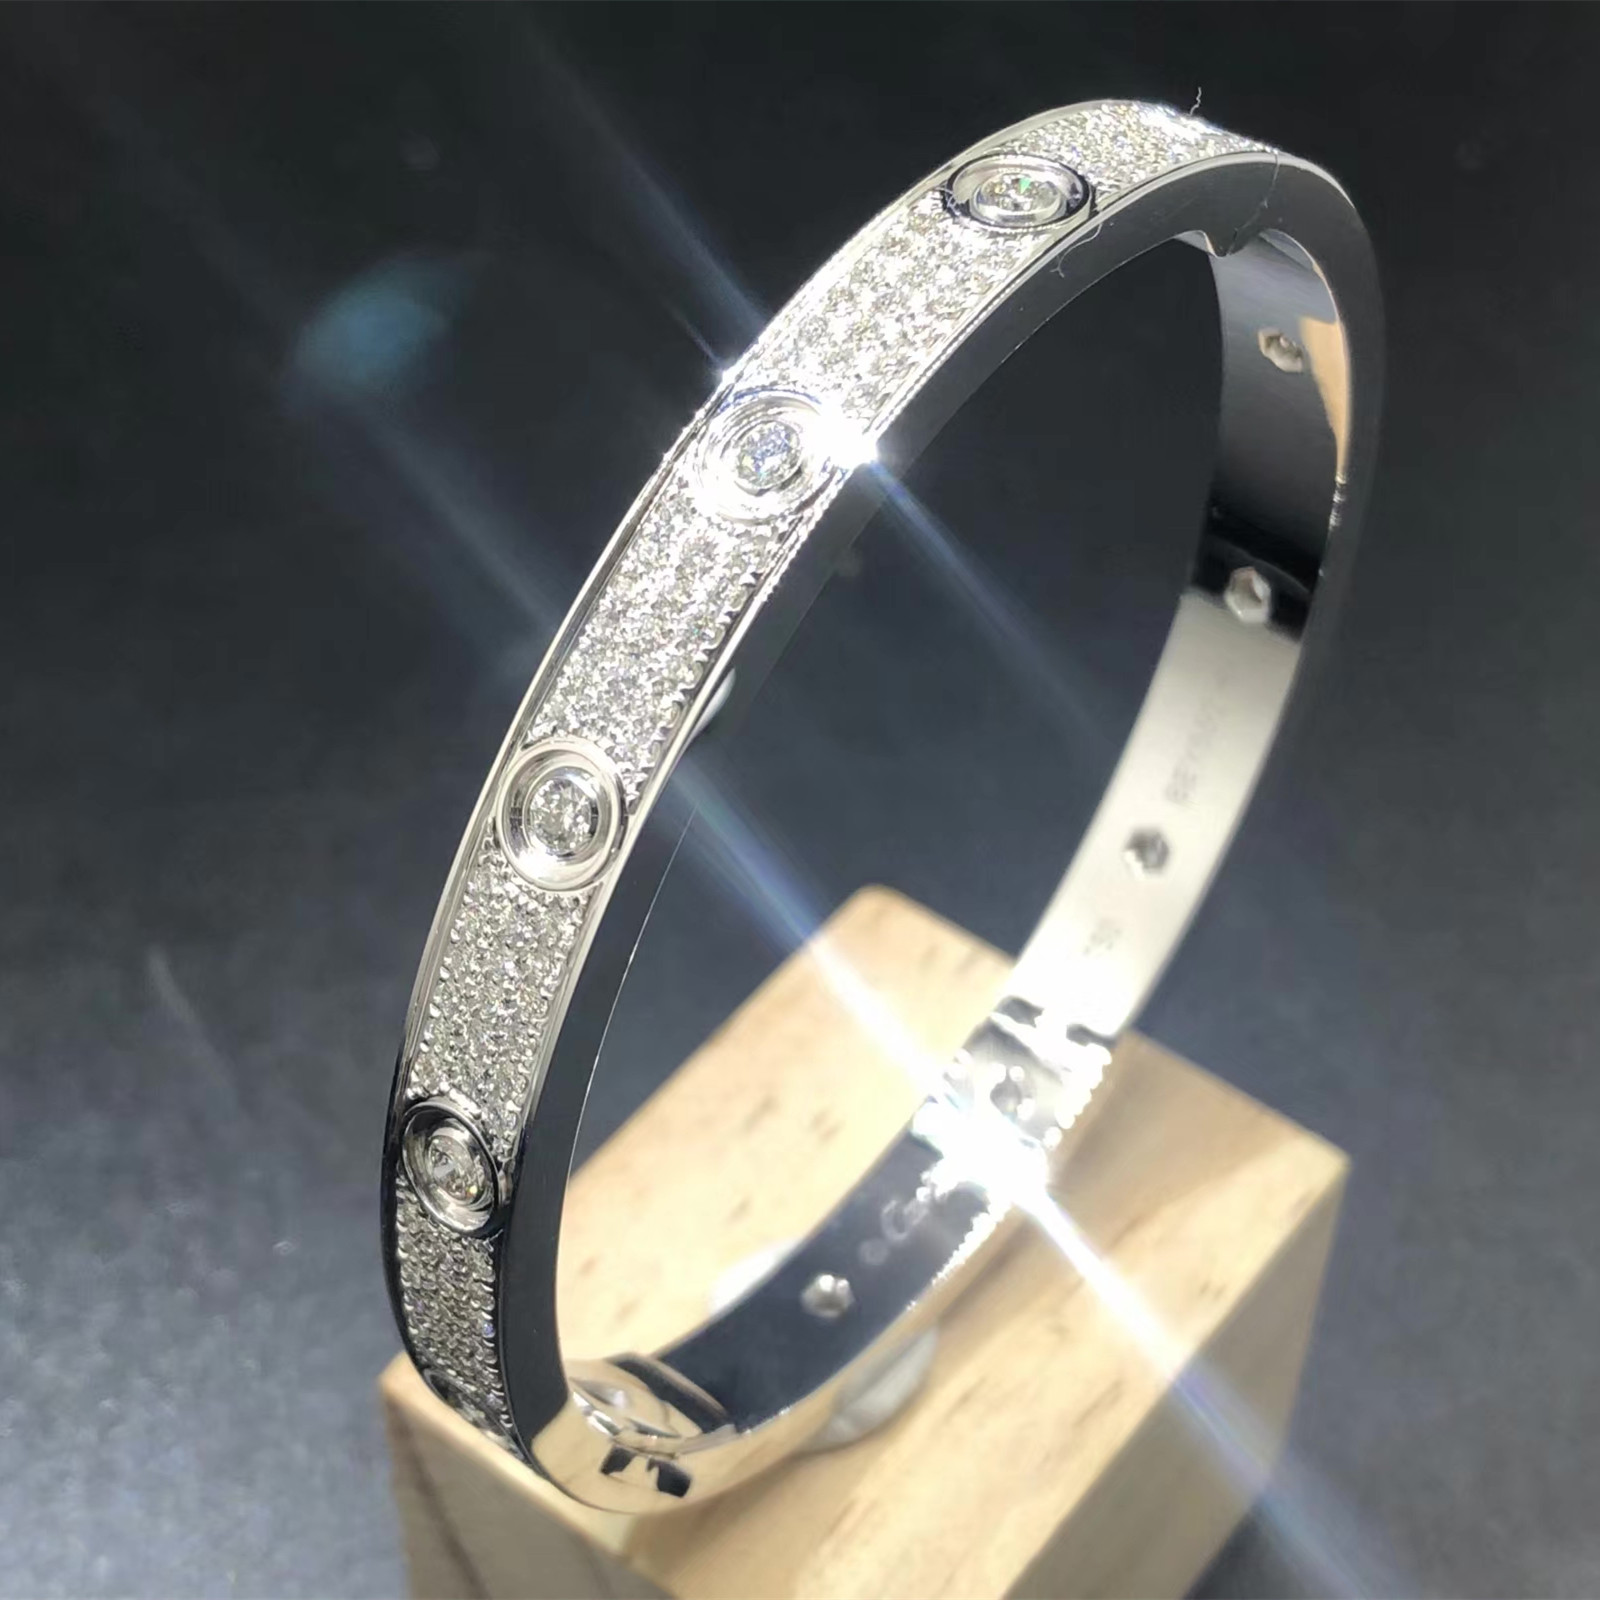 Cartier Love Bracelet Custom Made in Solid 18K White Gold with 216 Diamonds-paved